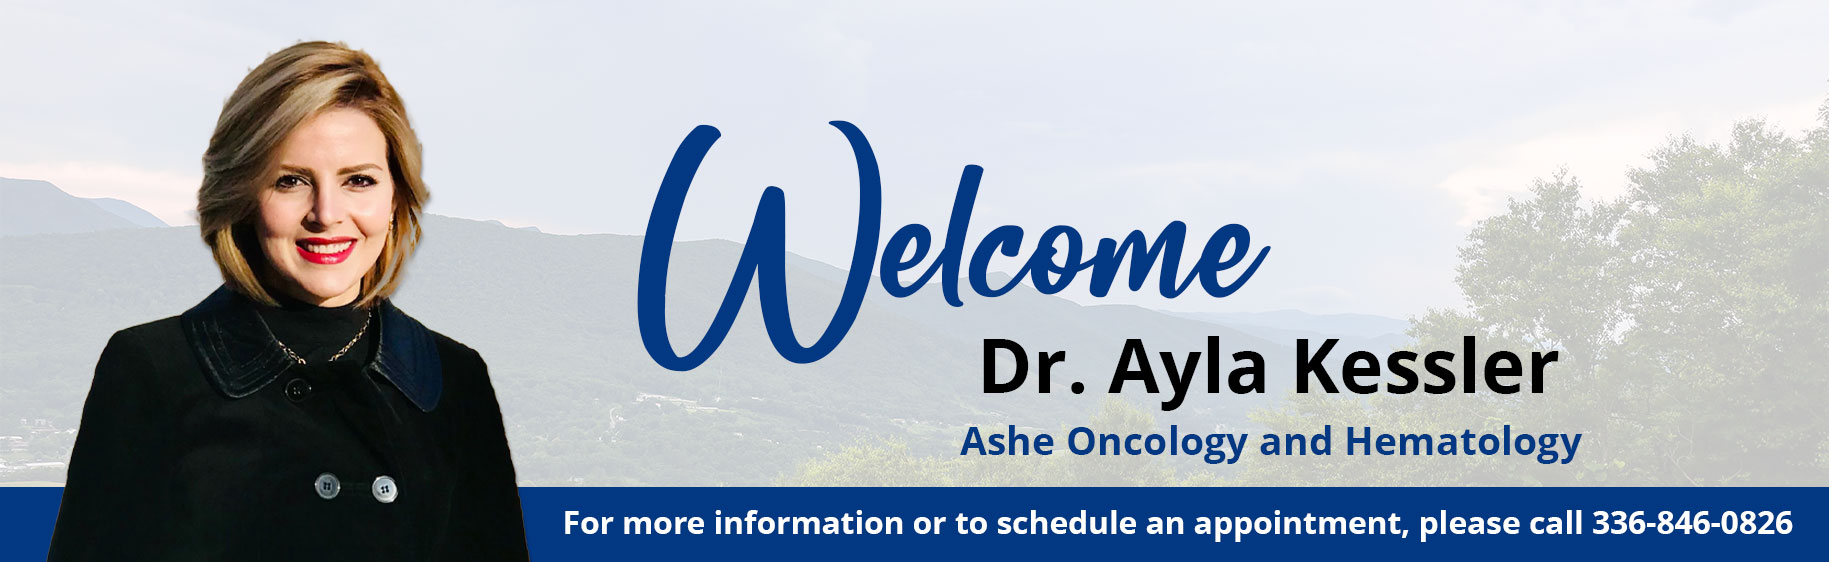 Ashe Oncology and Hematology welcomes Dr. Ayla Kessler
For more information or to schedule an appointment, please call 336-846-0826